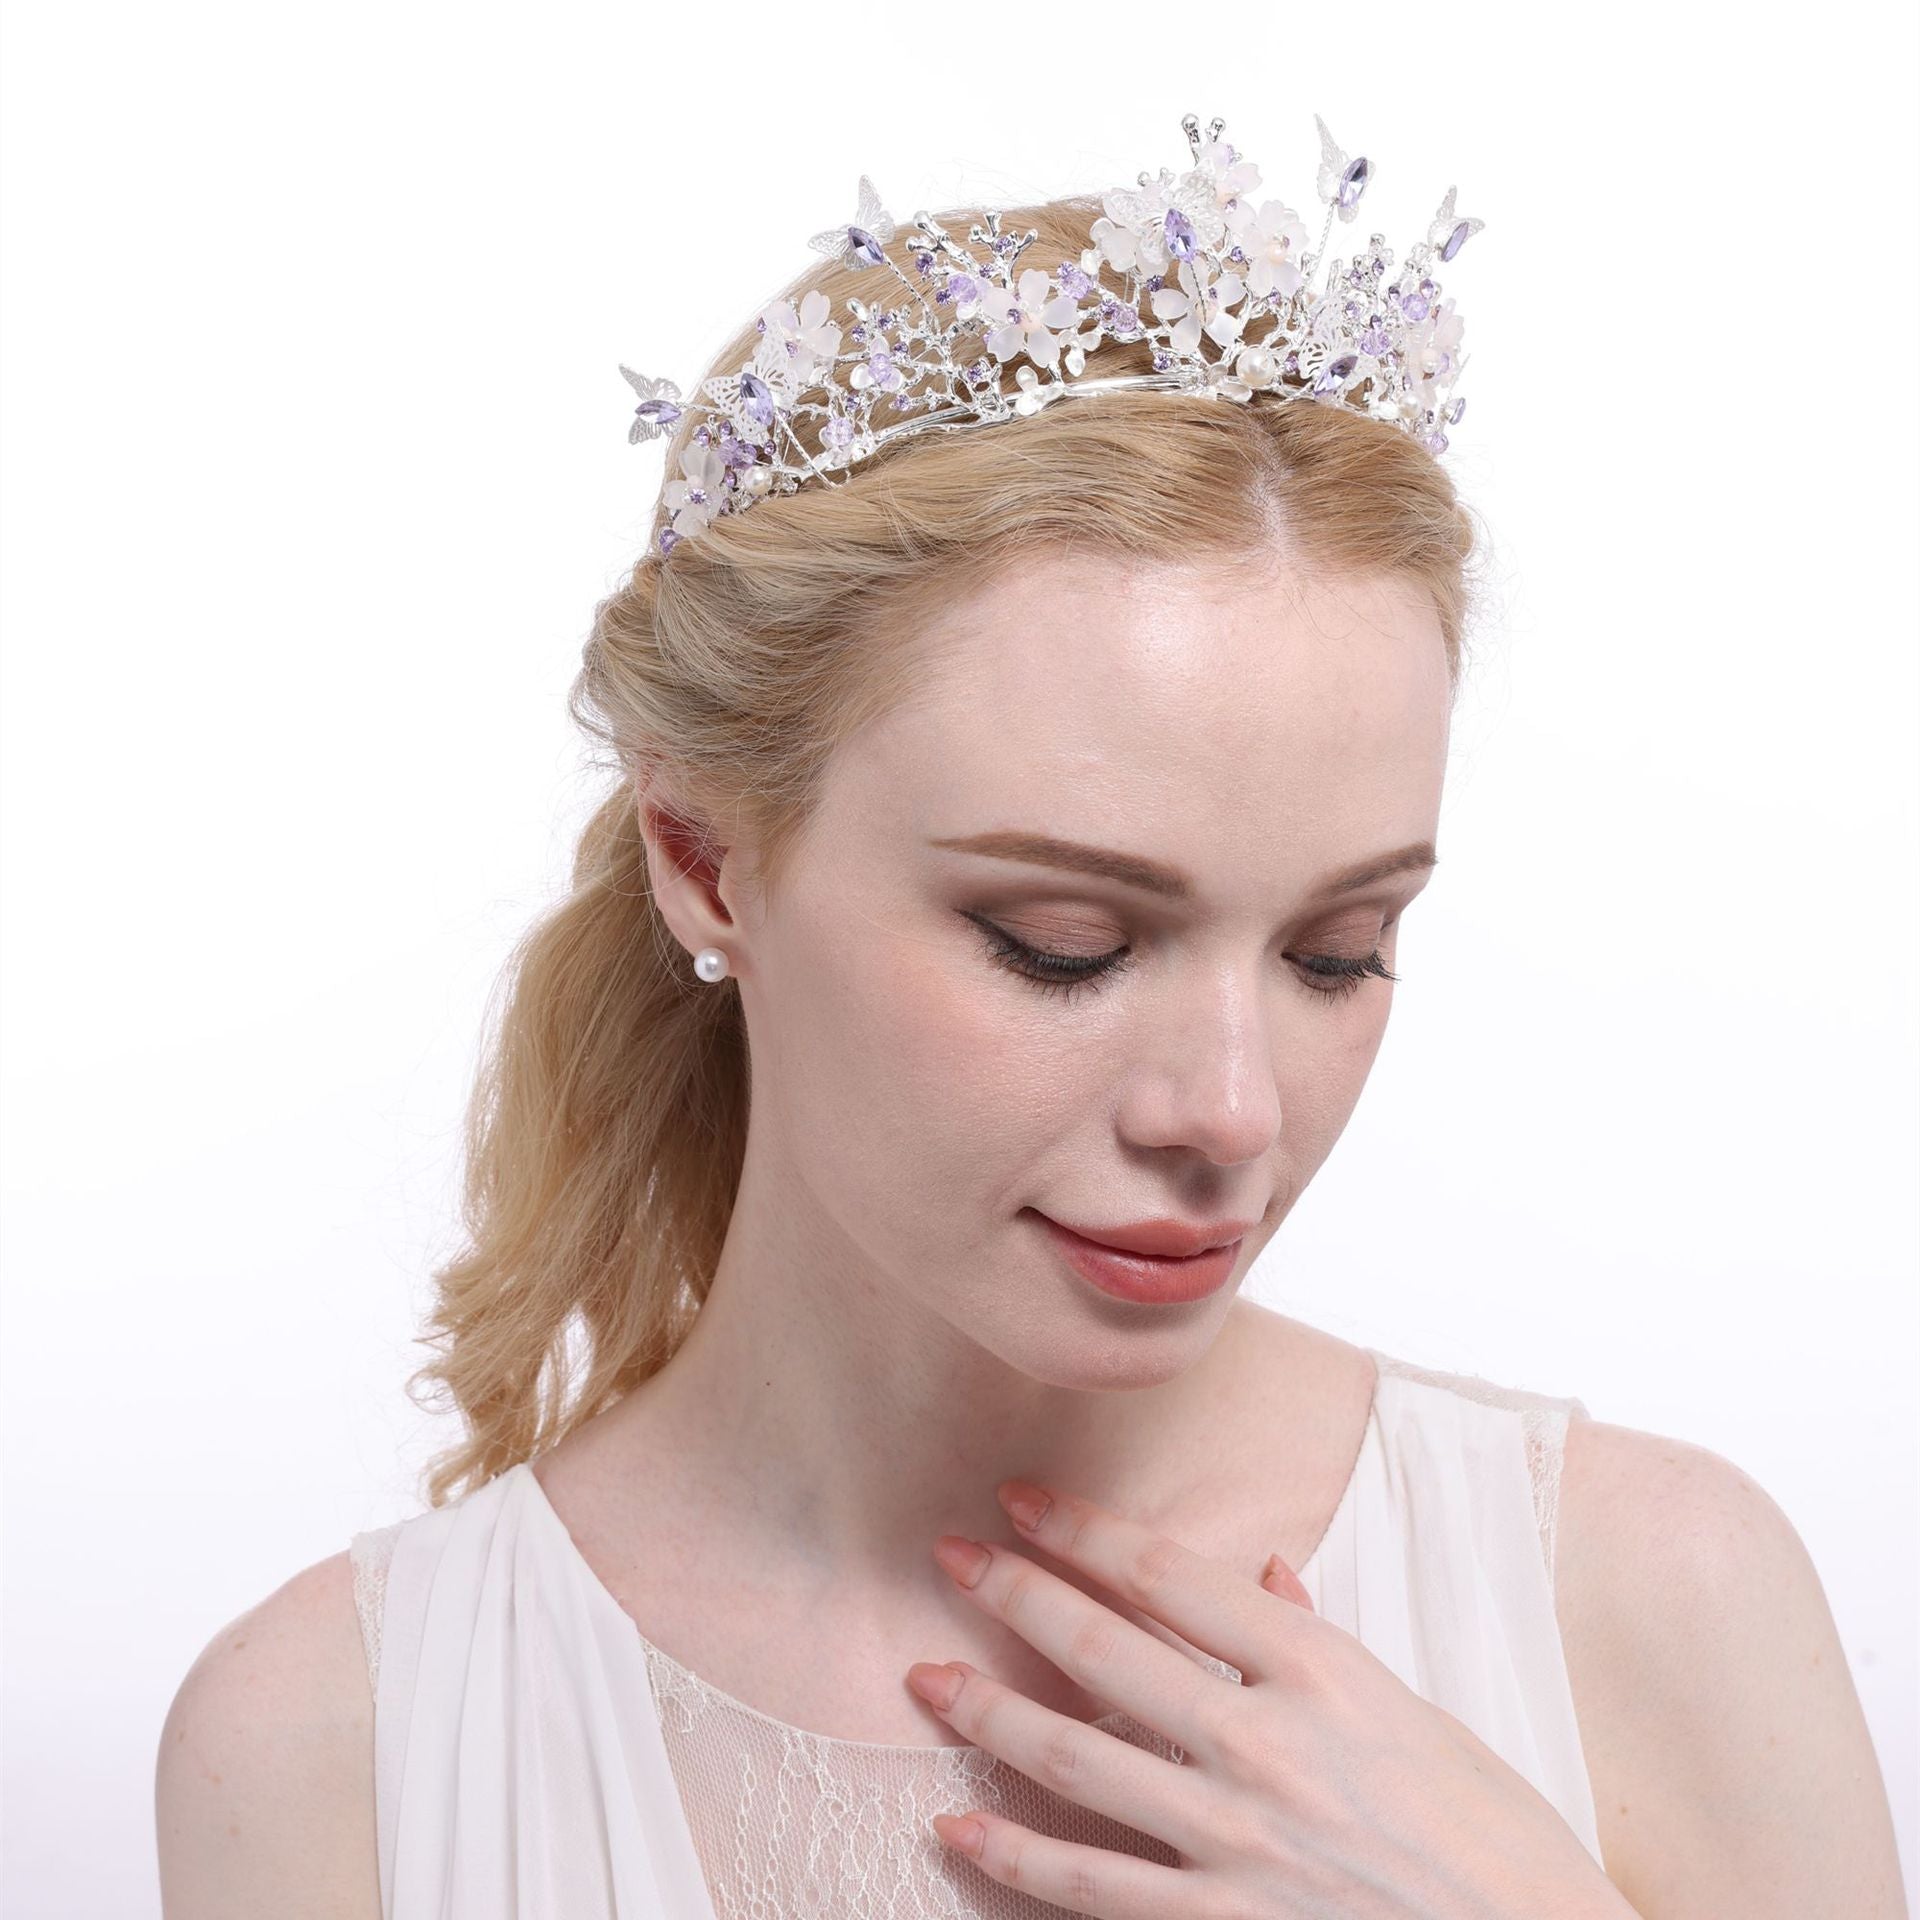 Exquisite and Elegant Headdress for Formal Occasions - Crown Headpiece for Parties and Special Events